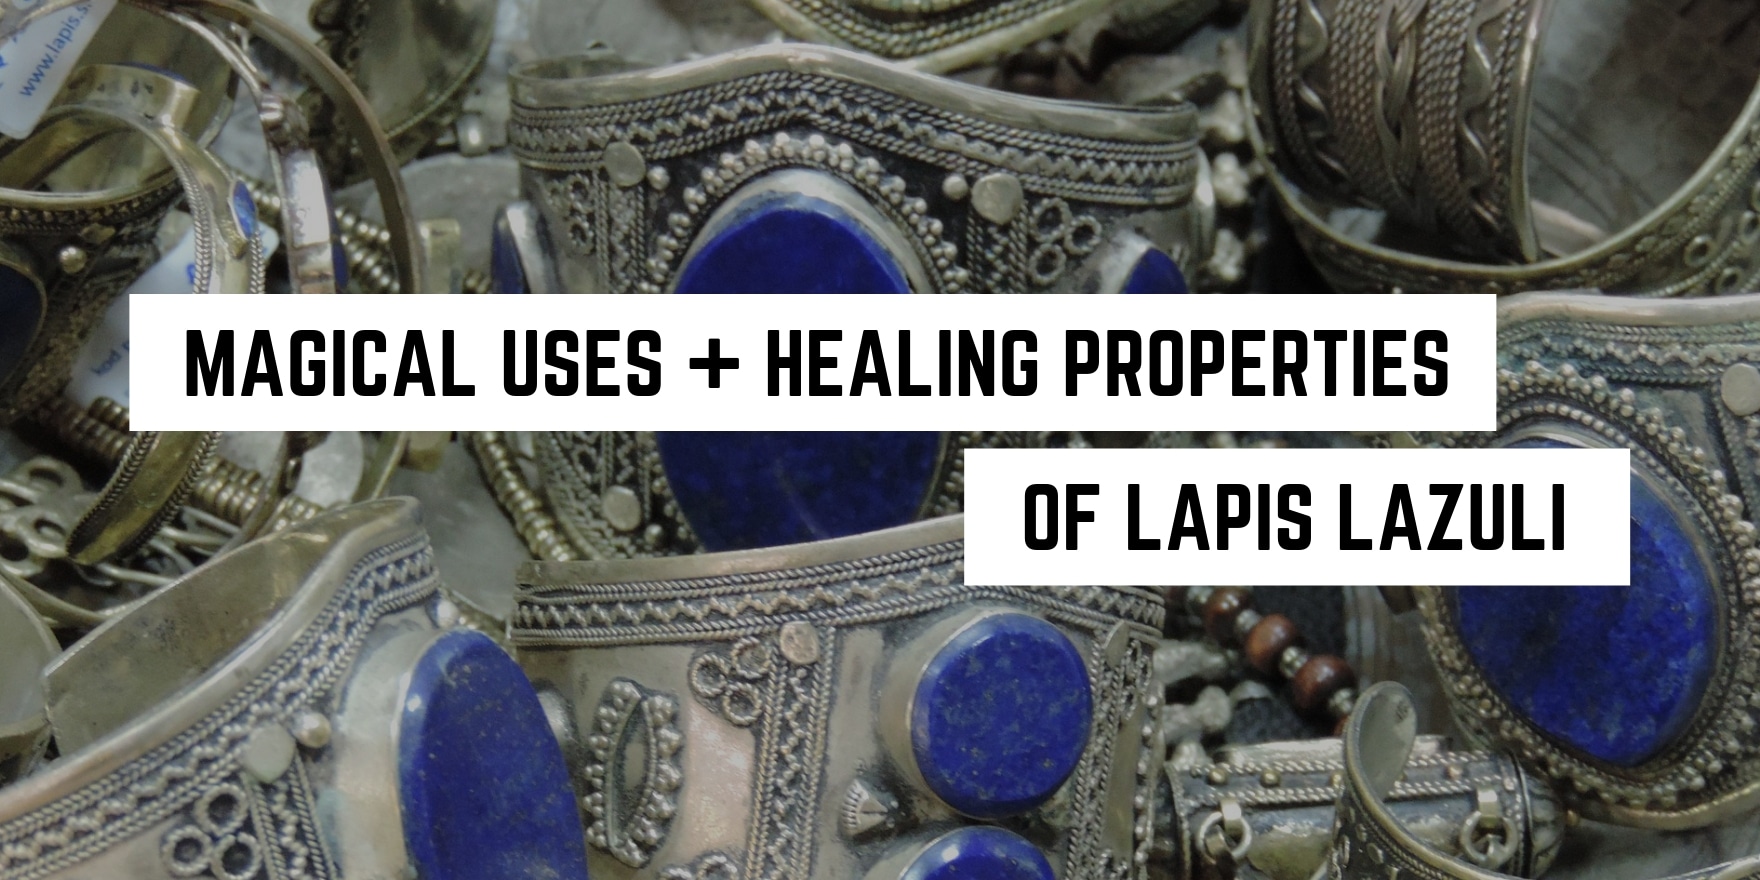 Lapis Lazuli Meaning: Spiritual Meaning & Magical Uses In Spells